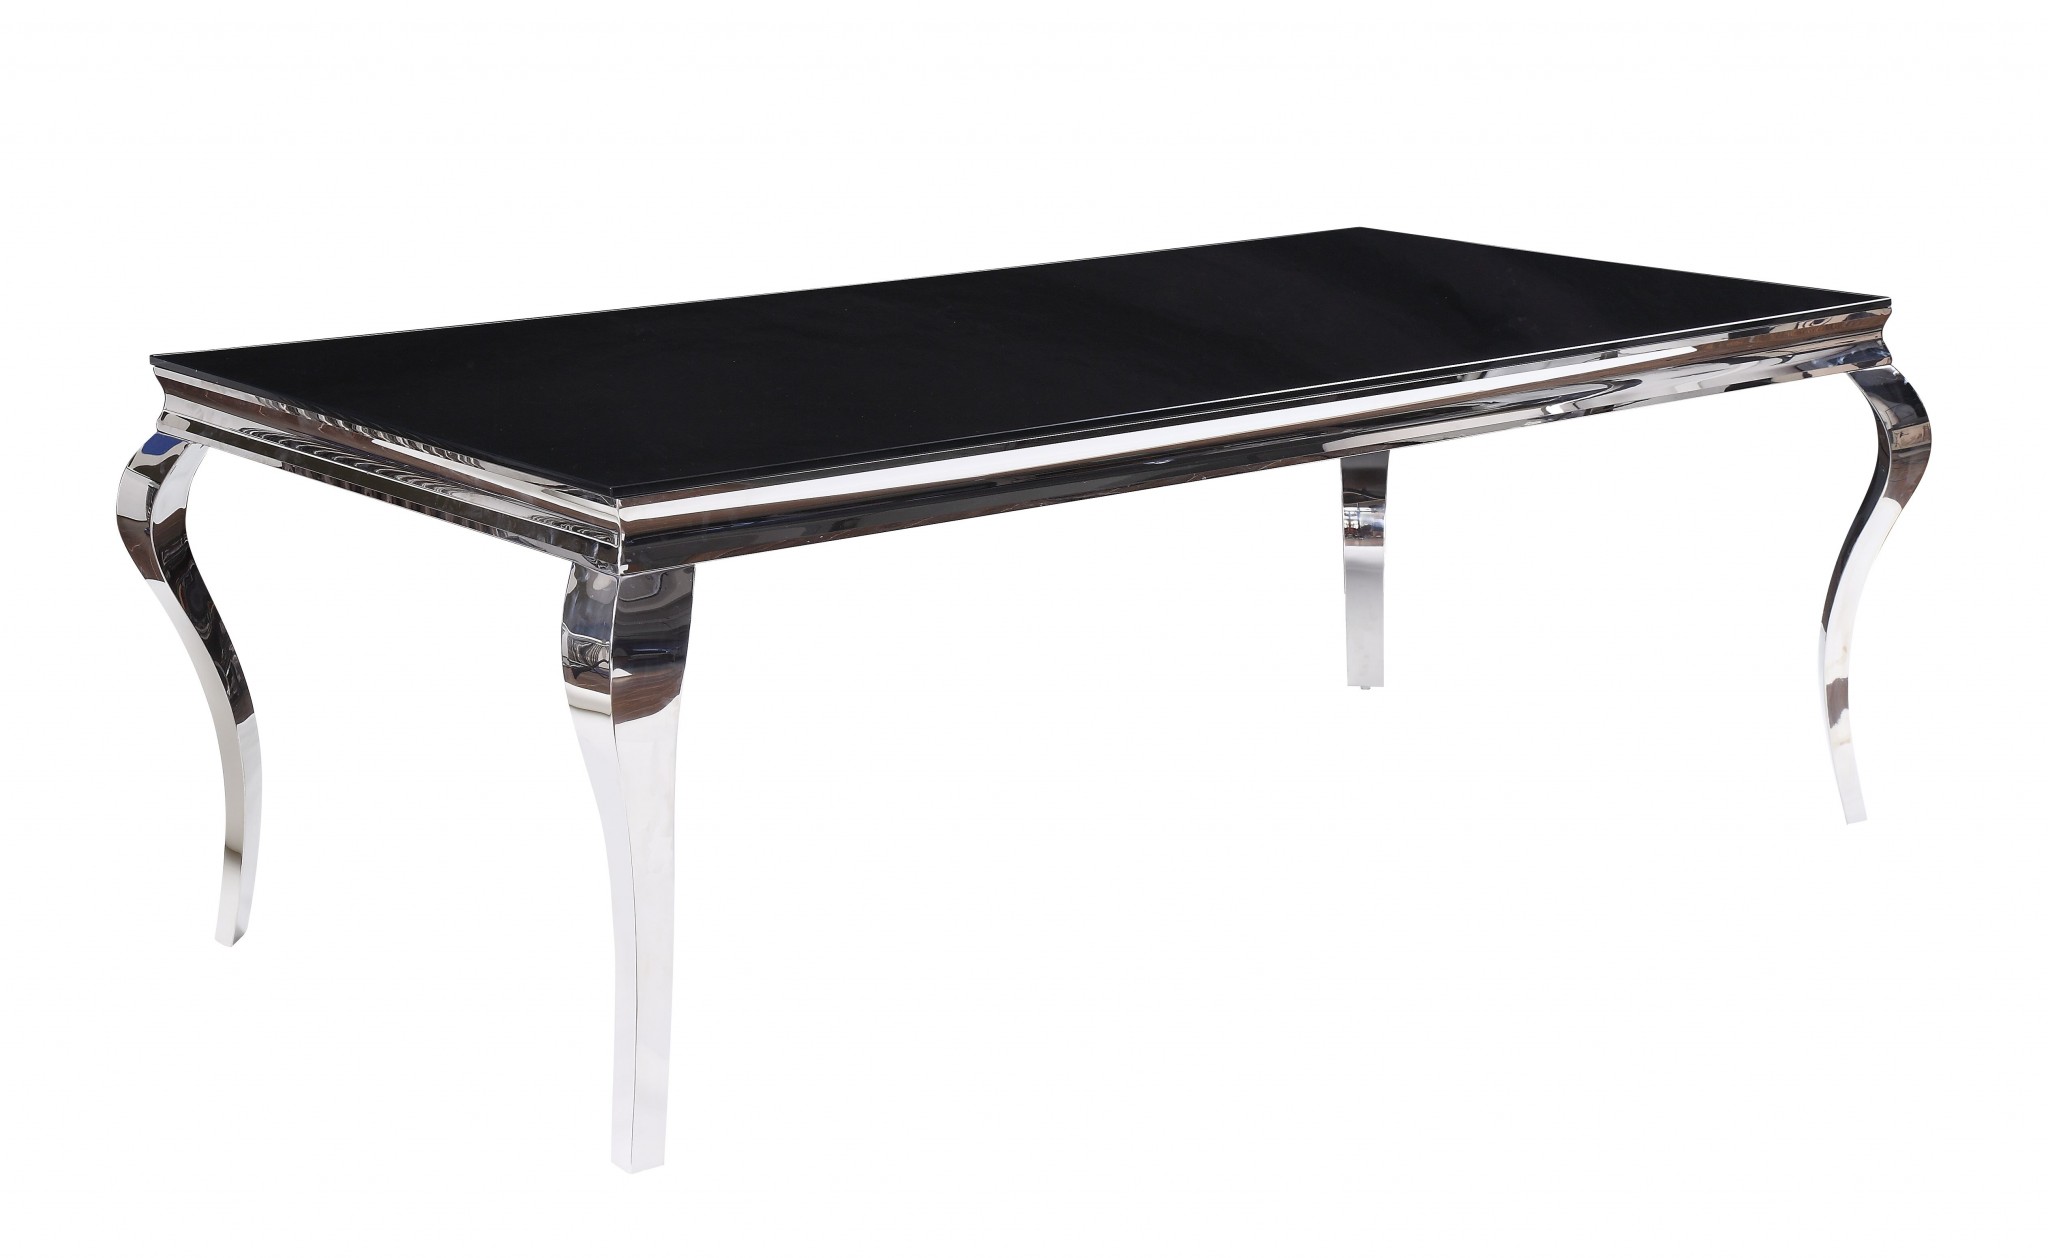 40" X 80" X 30" Stainless Steel Black Glass Dining Table